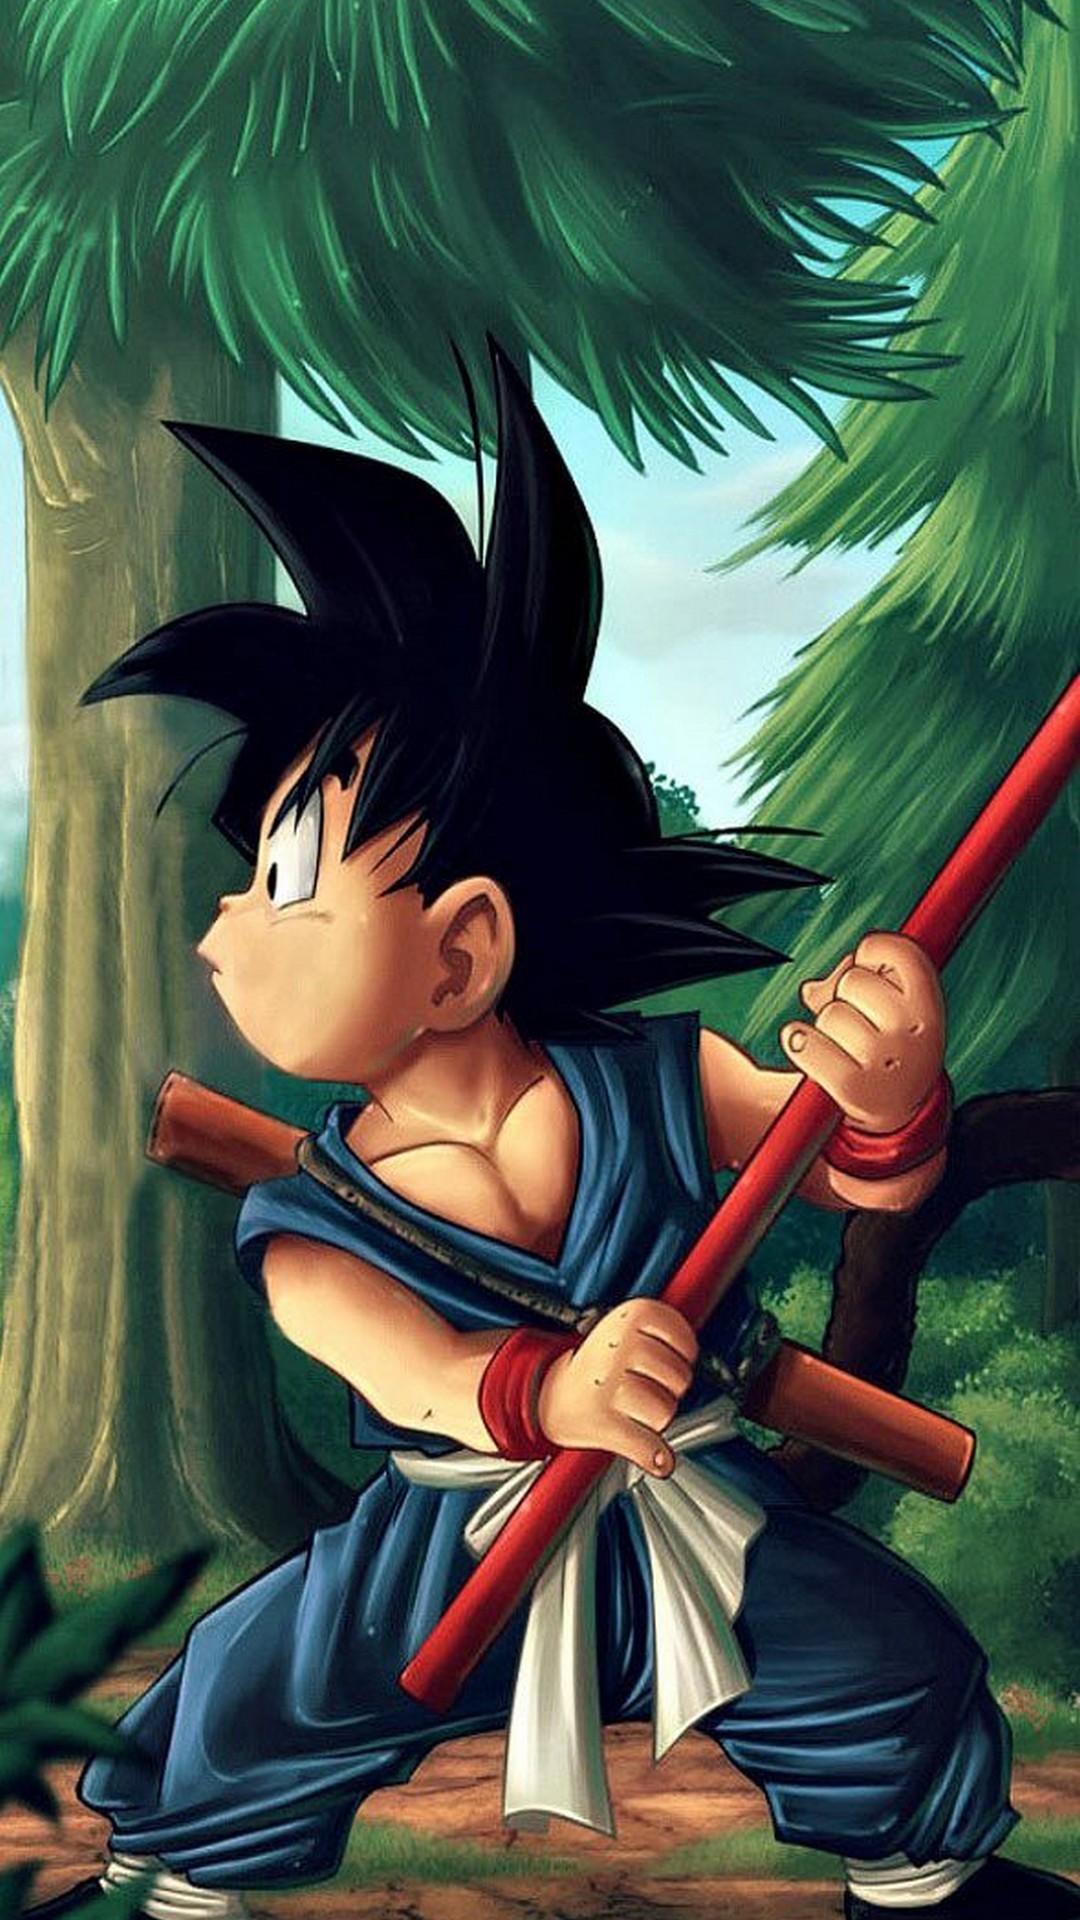 iPhone Wallpaper Kid Goku with image resolution 1080x1920 pixel. You can make this wallpaper for your iPhone 5, 6, 7, 8, X backgrounds, Mobile Screensaver, or iPad Lock Screen